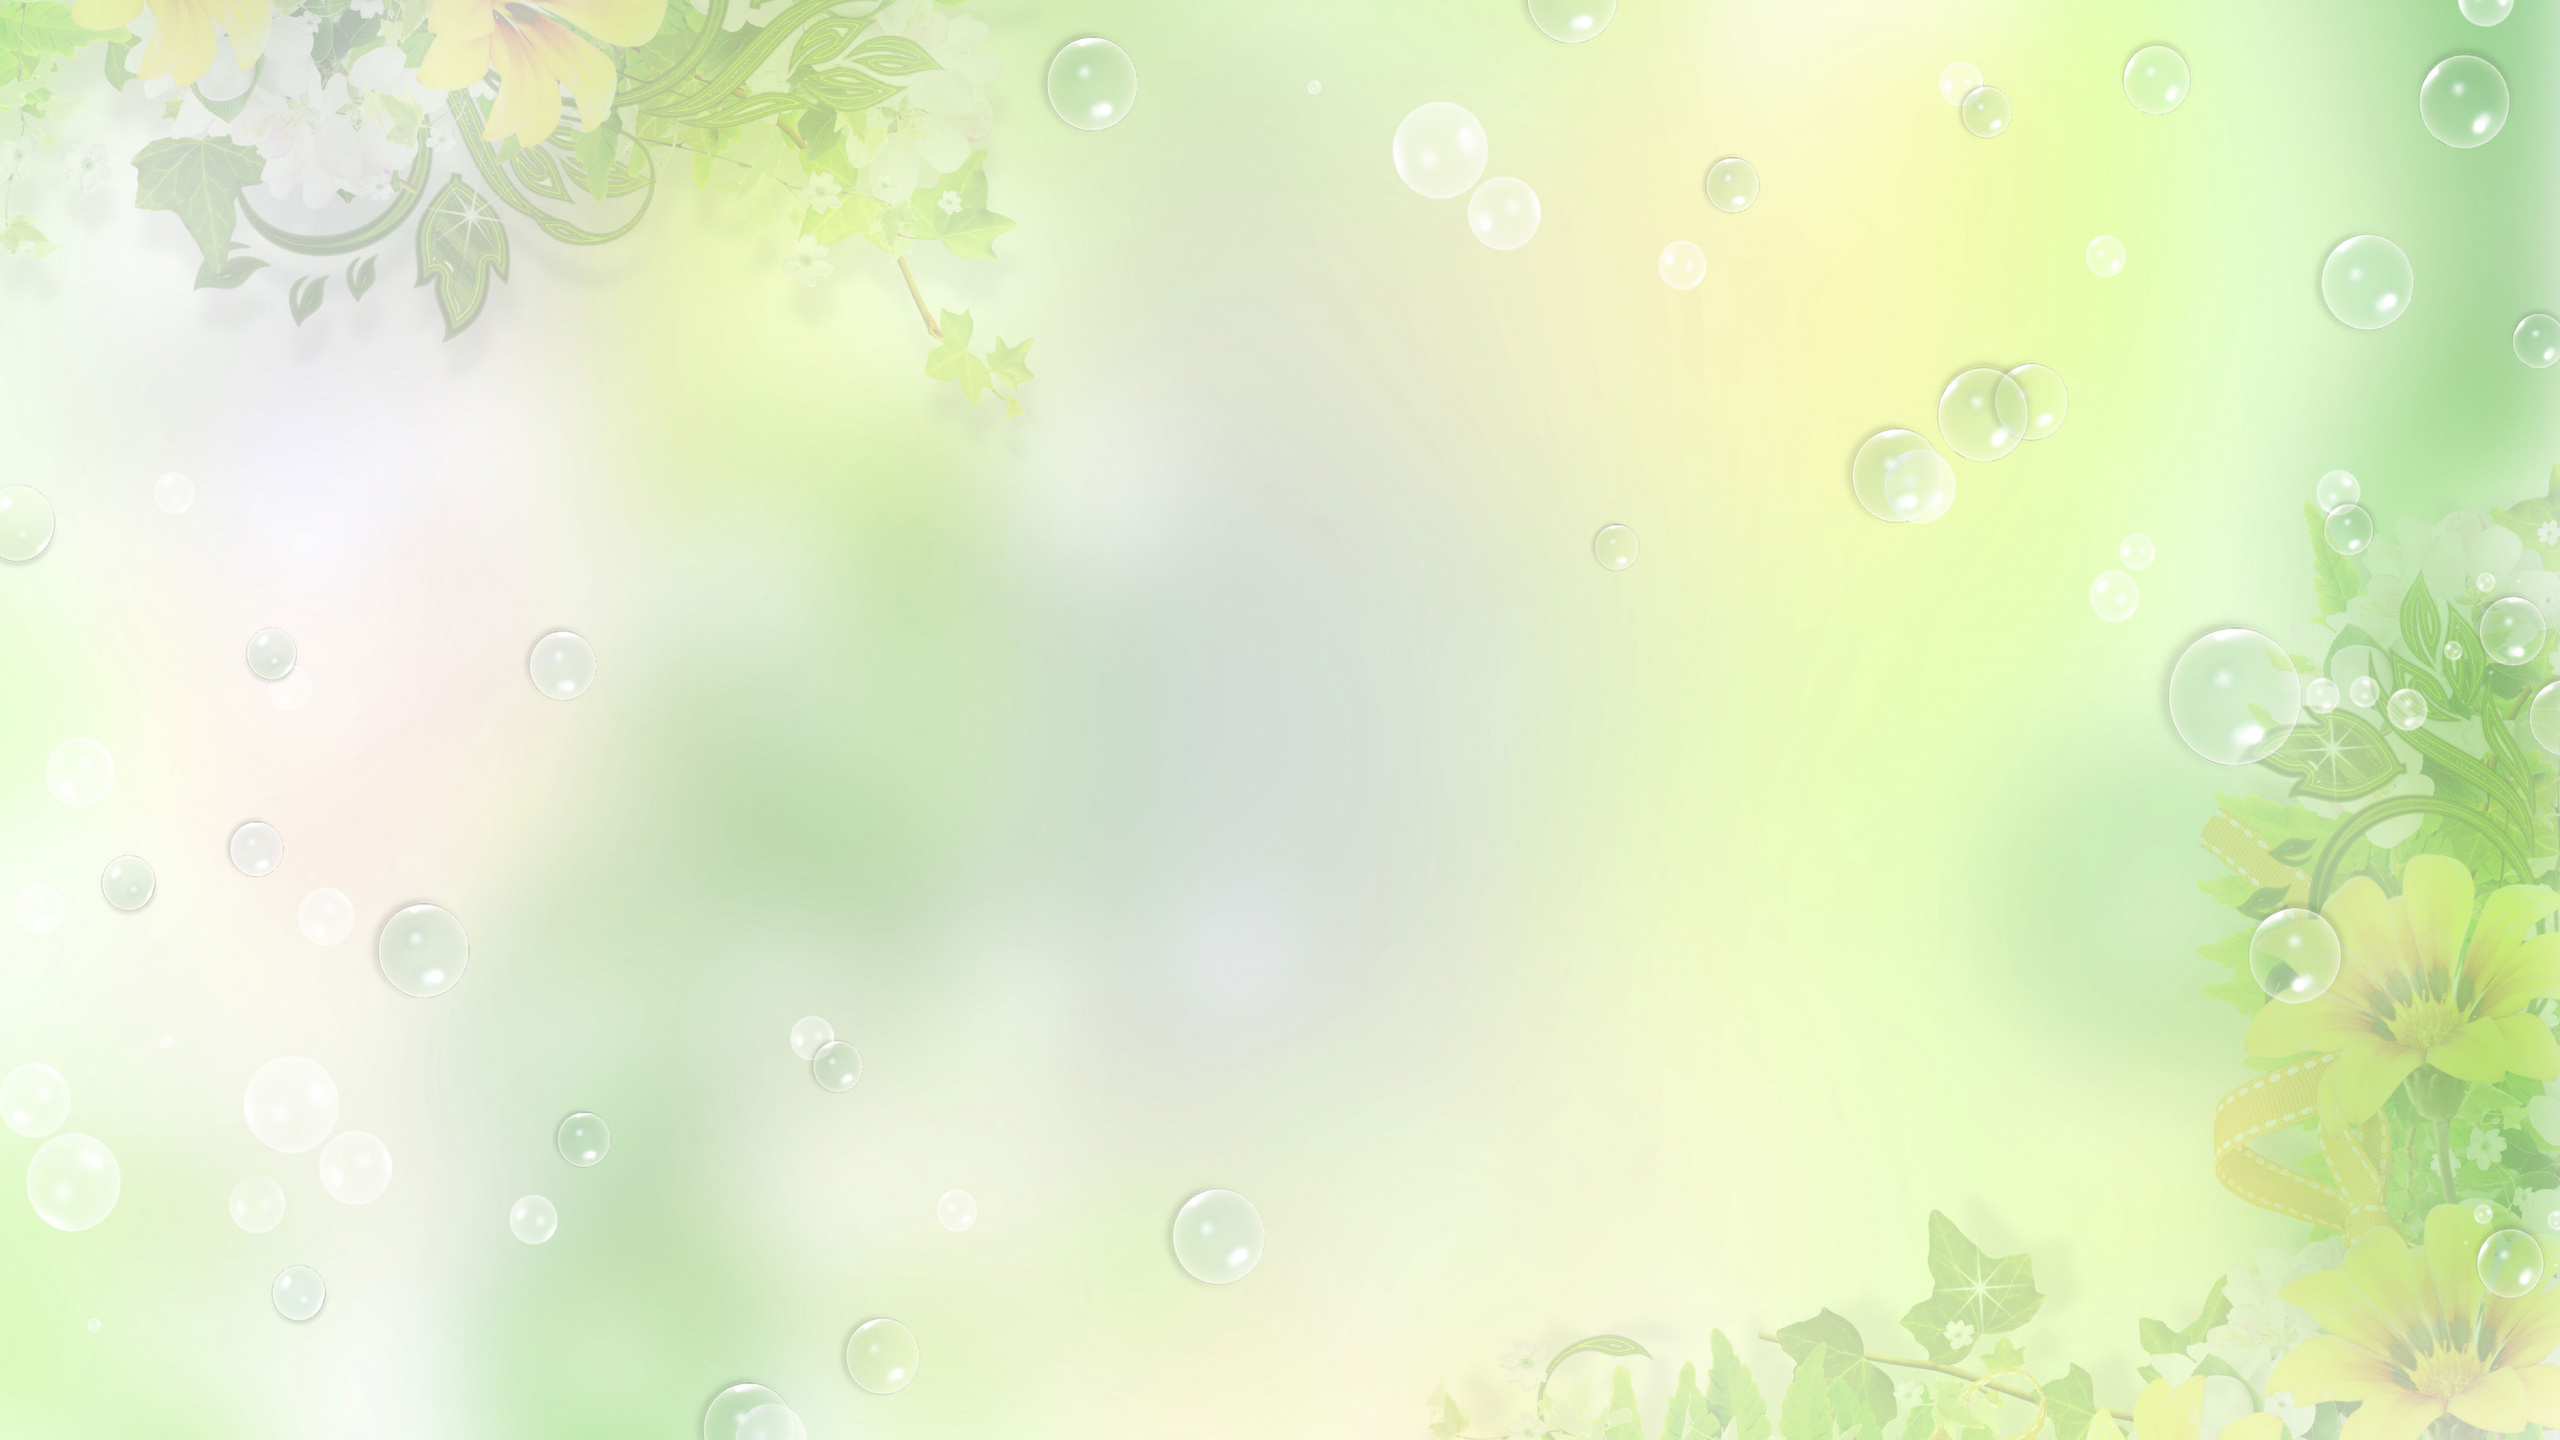 Water Droplets on Green Leaves. Wallpaper in 2560x1440 Resolution